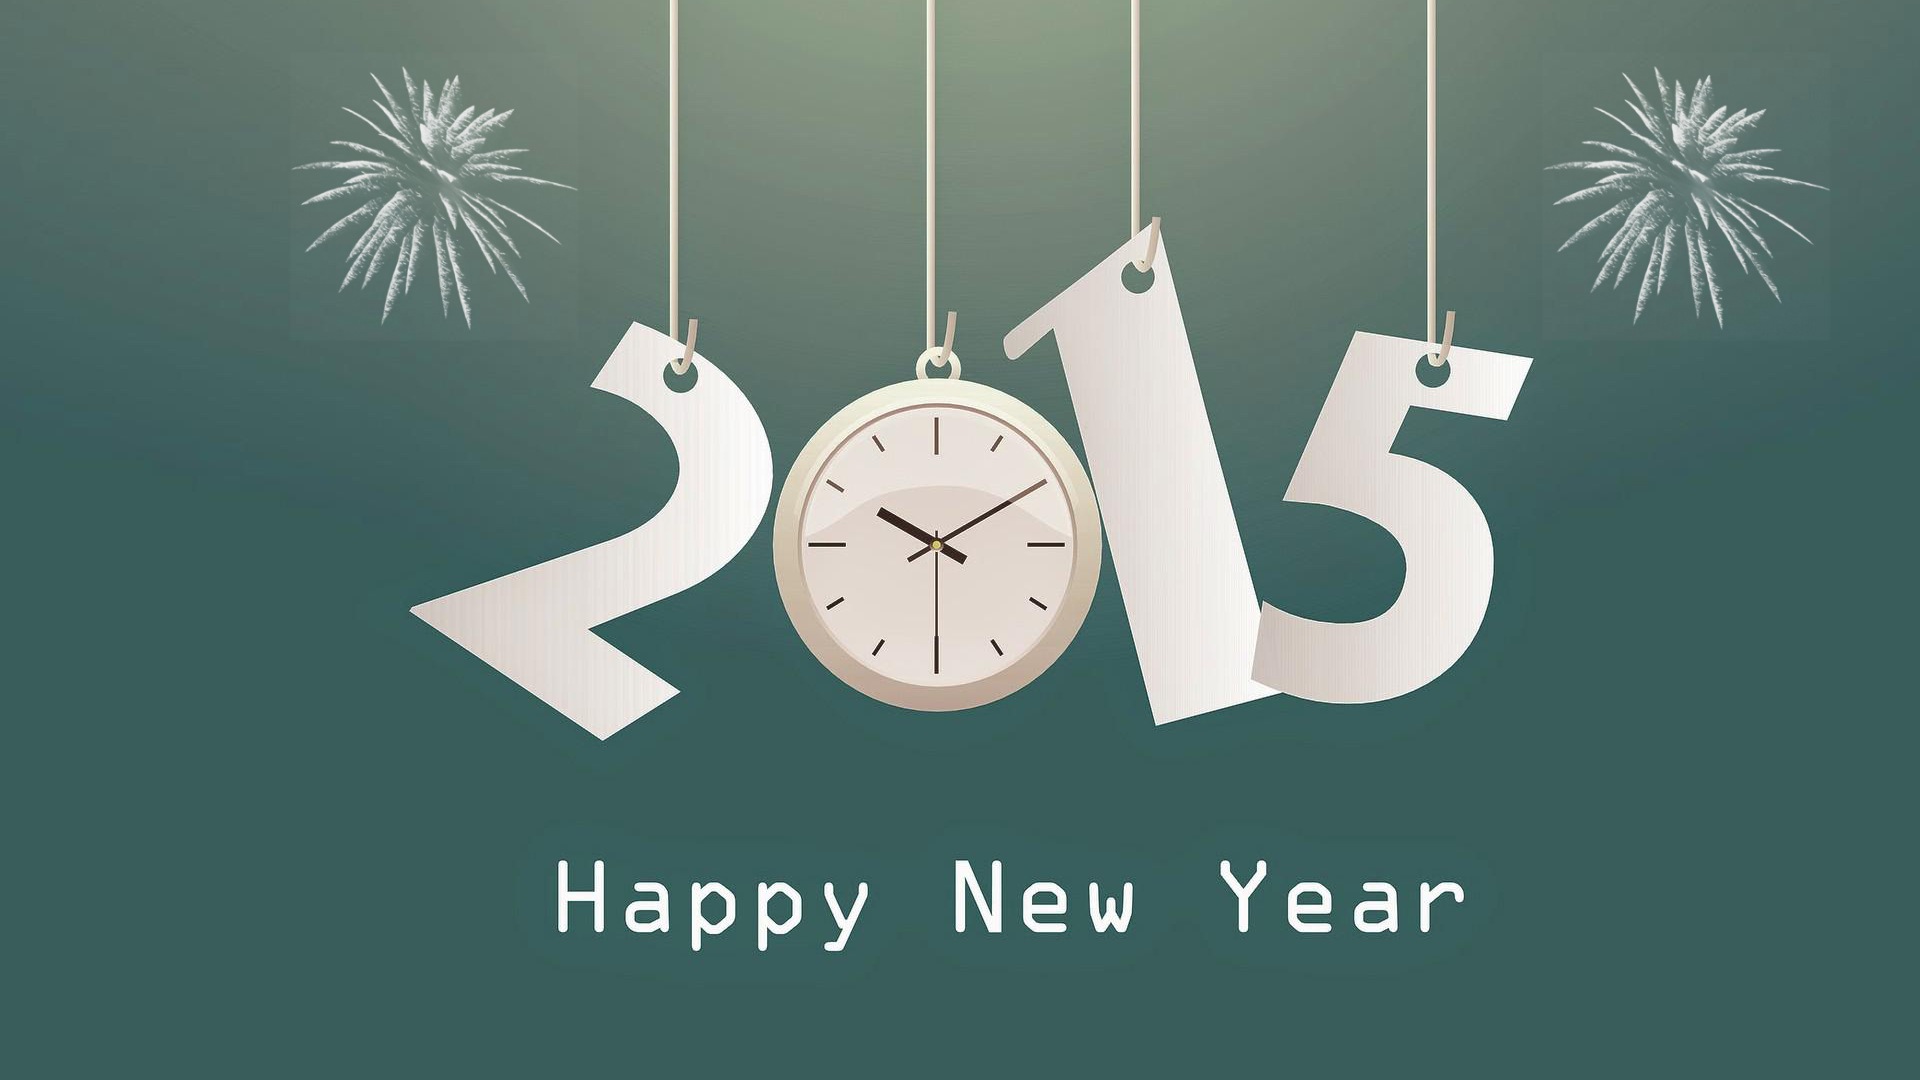 2015 New Year theme HD wallpapers (2) #9 - 1920x1080